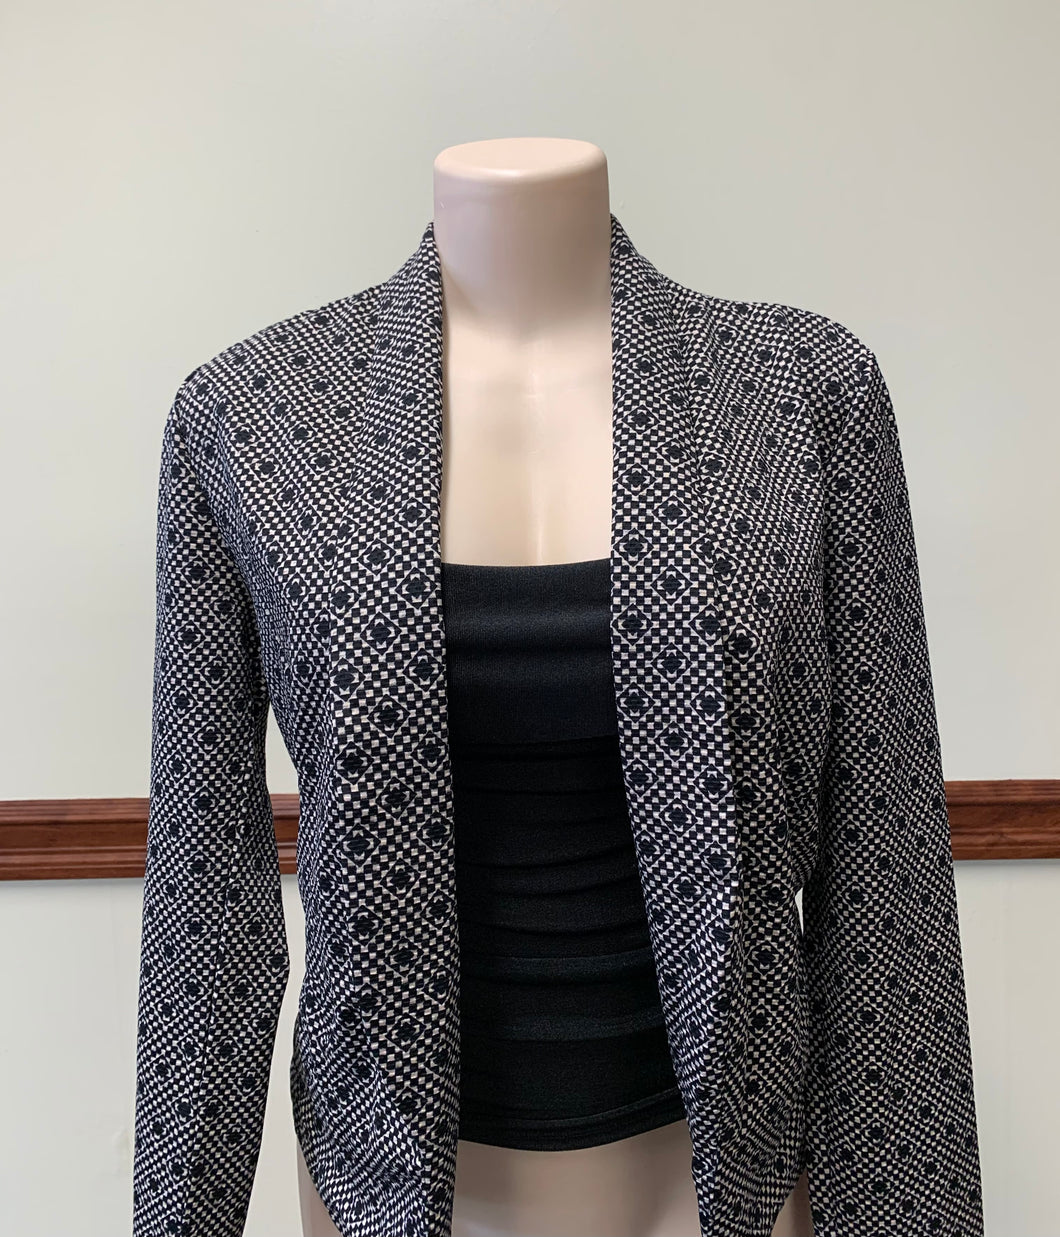 Light Pink & Black Blazer Available in sizes M ONLY